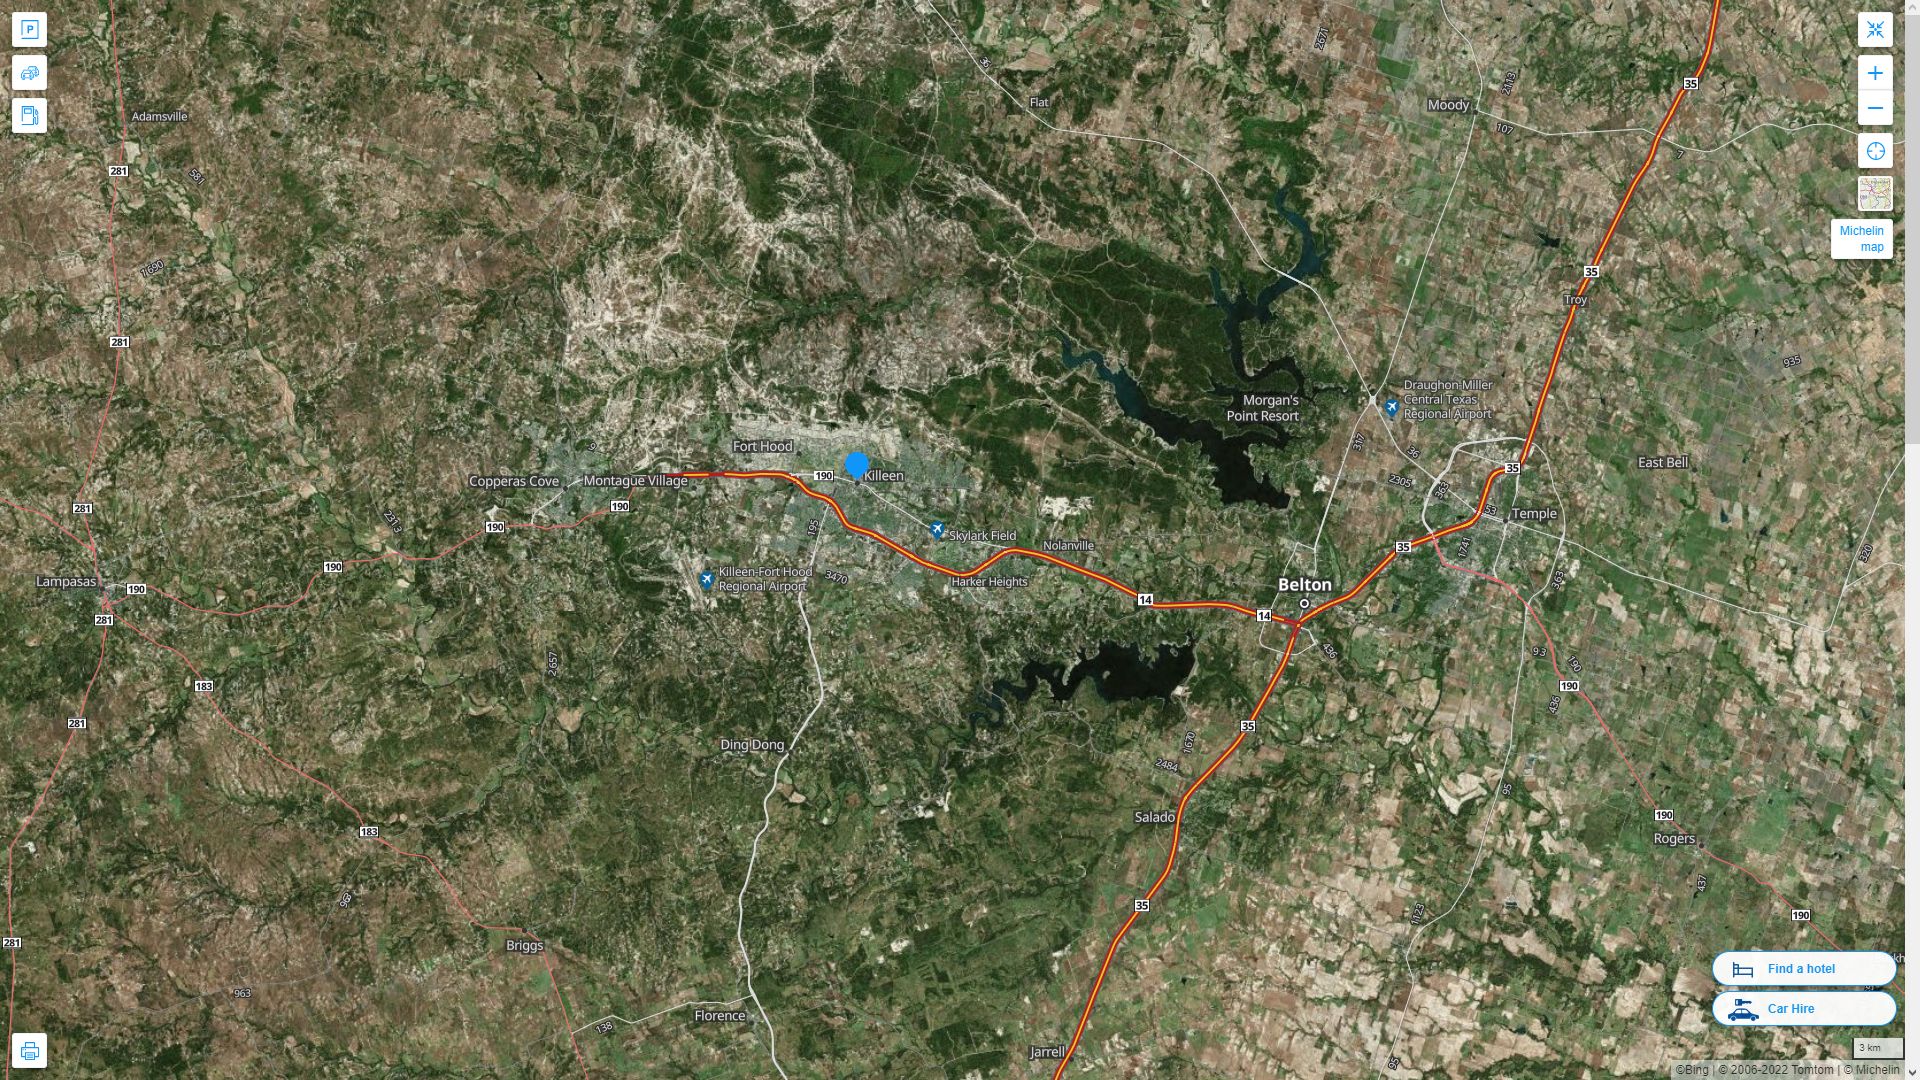 Killeen Texas Highway and Road Map with Satellite View